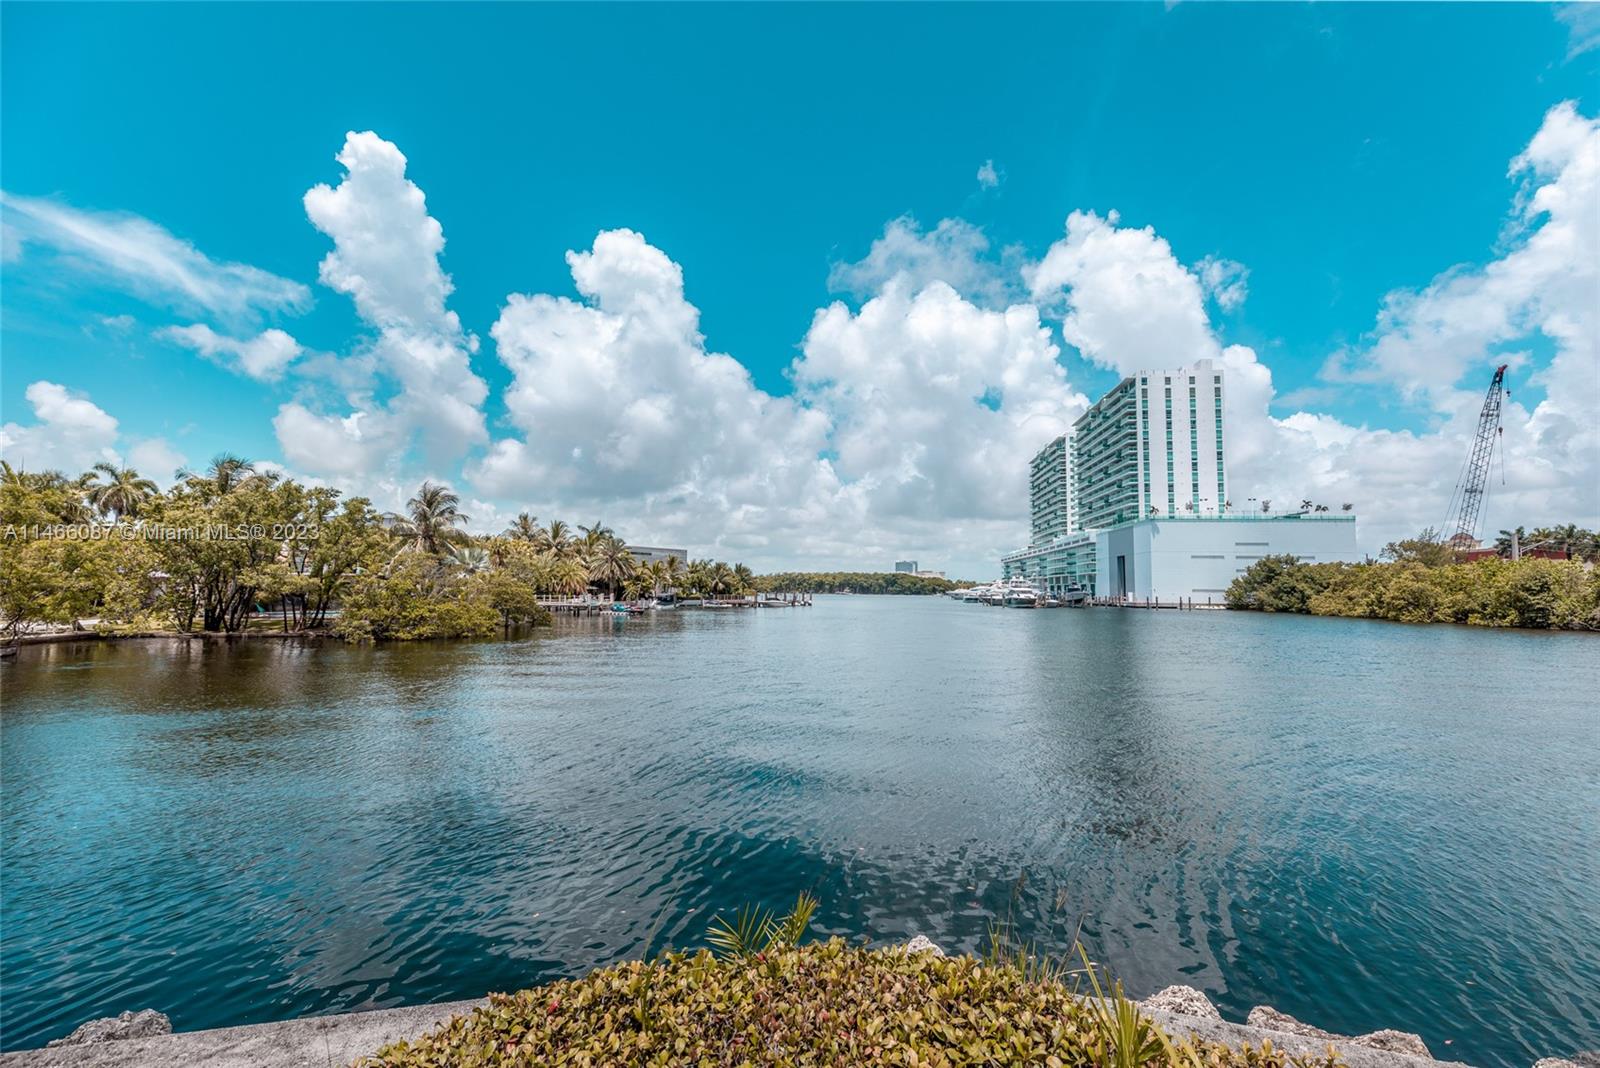 Do you want to live with the luxury you deserve? Move to Oceania V in Sunny Isles Beach. This beautiful 2 bedroom, 2 bathroom 1566 SqF apartment with a wonderful view of the Intracoastal and just across the street from the beach awaits you. This unit is comfortably furnished with everything required for your enjoyment (also available for sale)